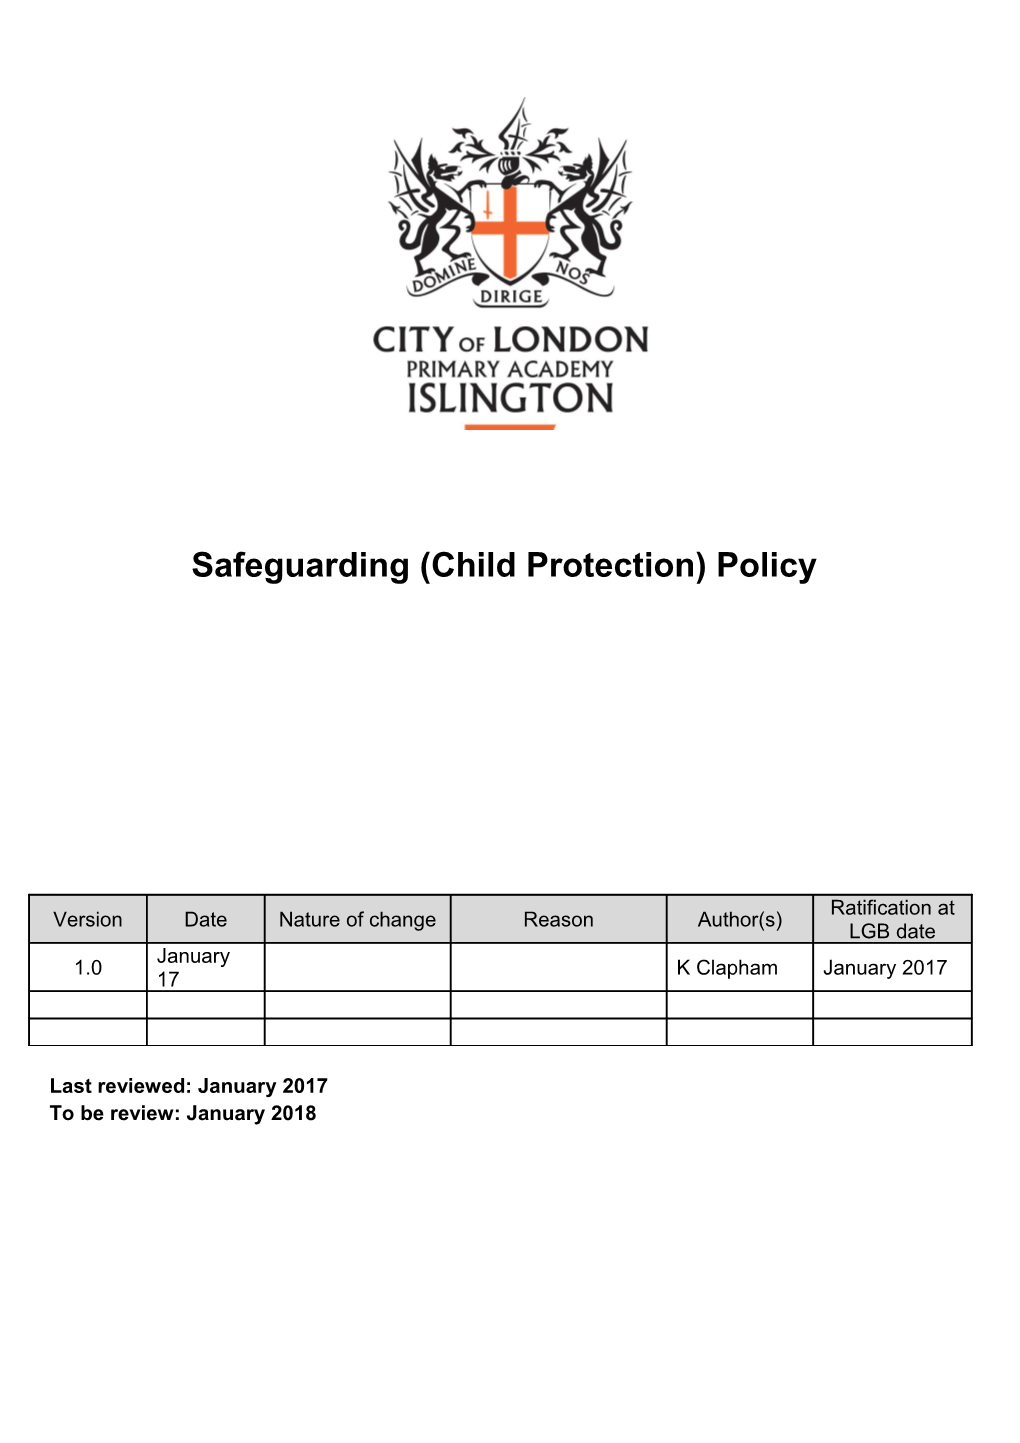 The School S Child Protection (CP) Policy Draws Upon Duties Conferred By